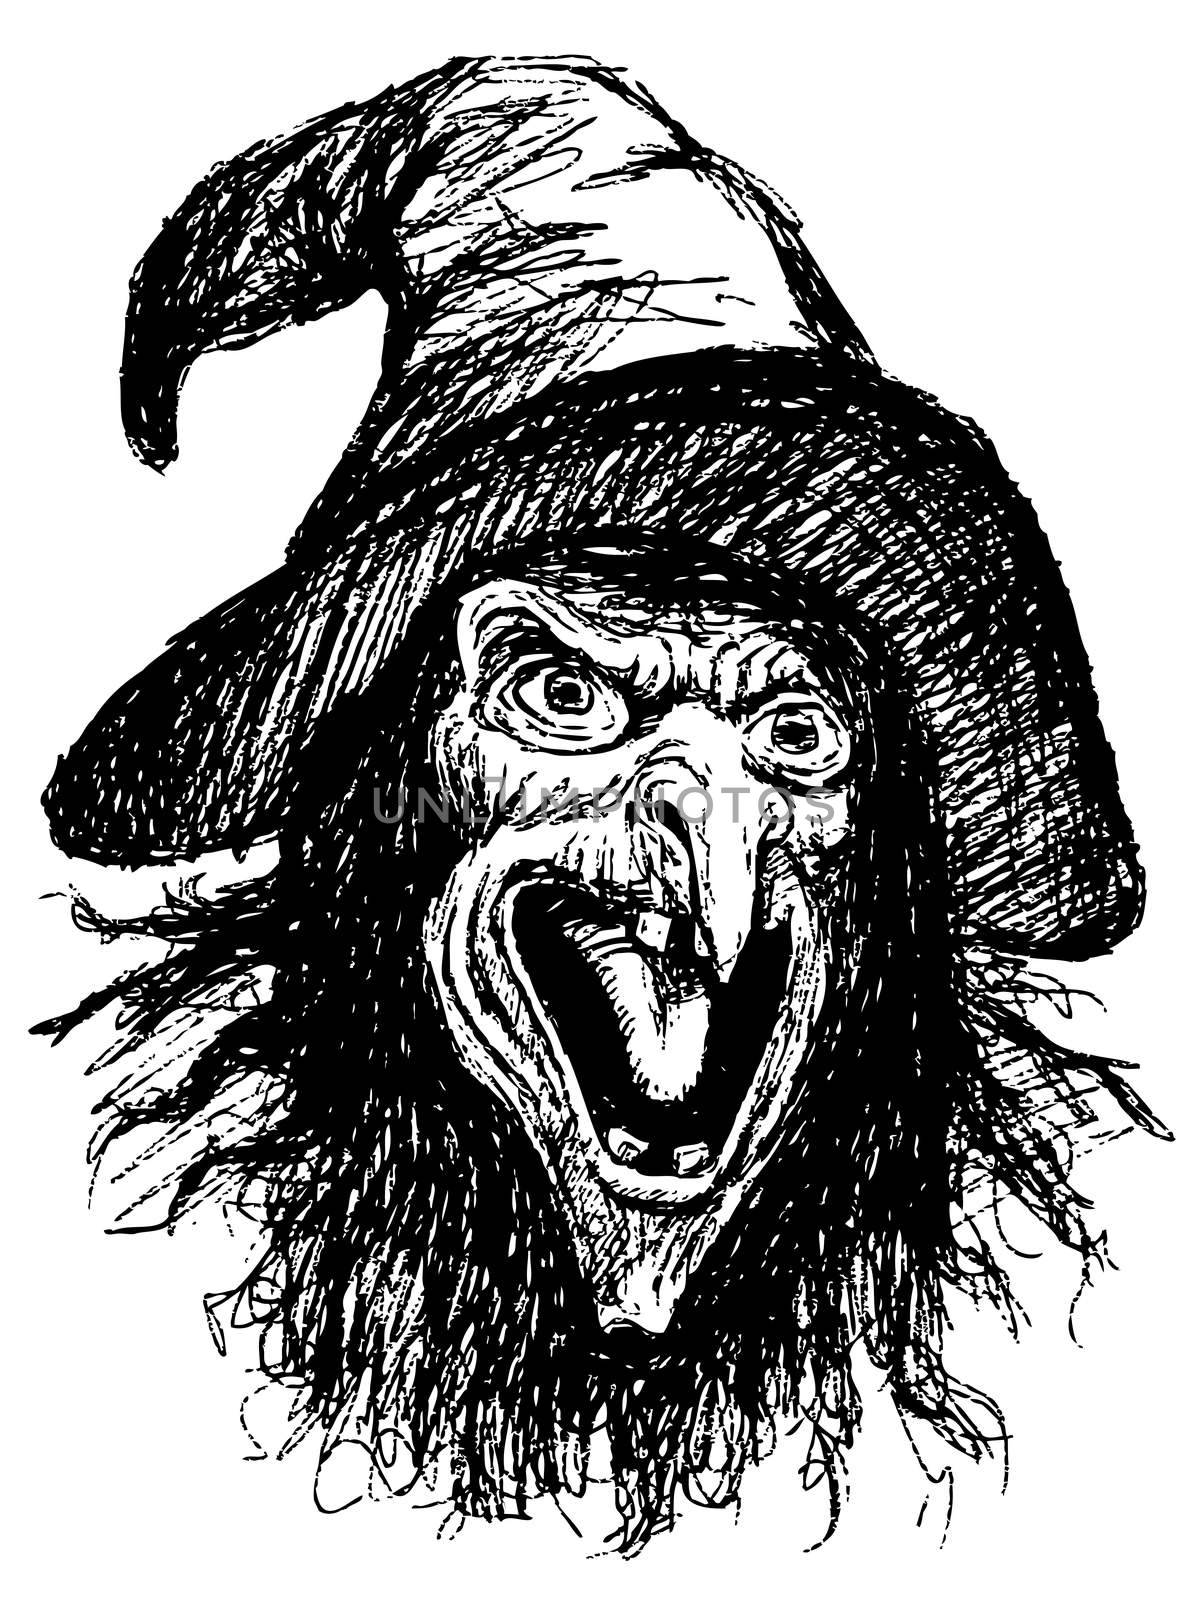 hand drawing of witch portrait with hat by pencil . made for Halloween day